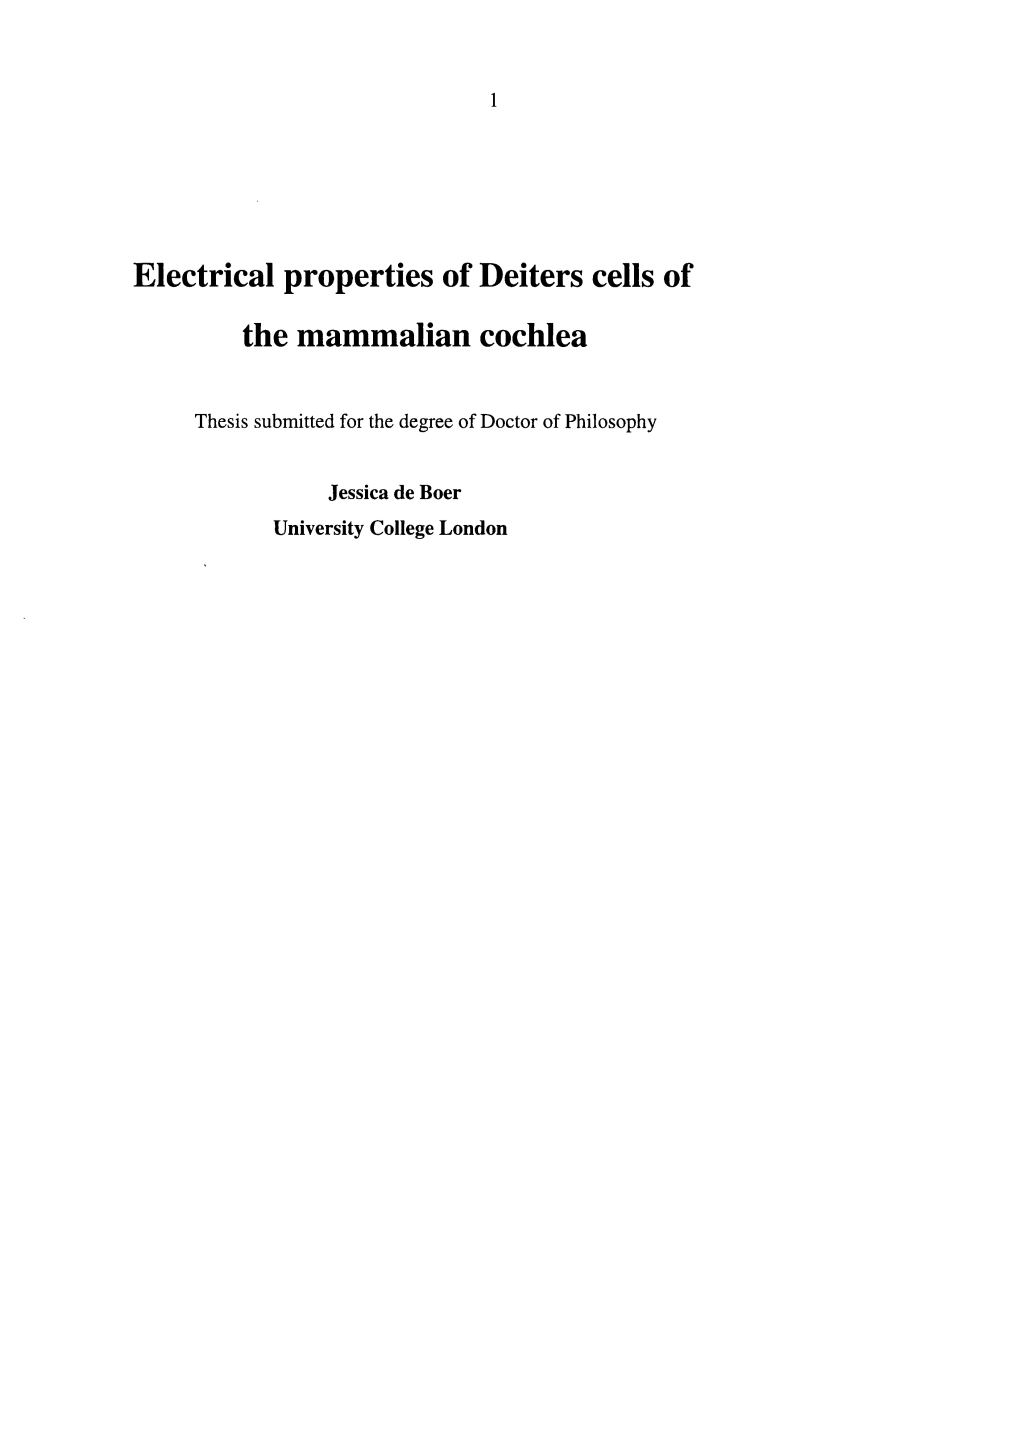 Electrical Properties of Deiters Cells of the Mammalian Cochlea